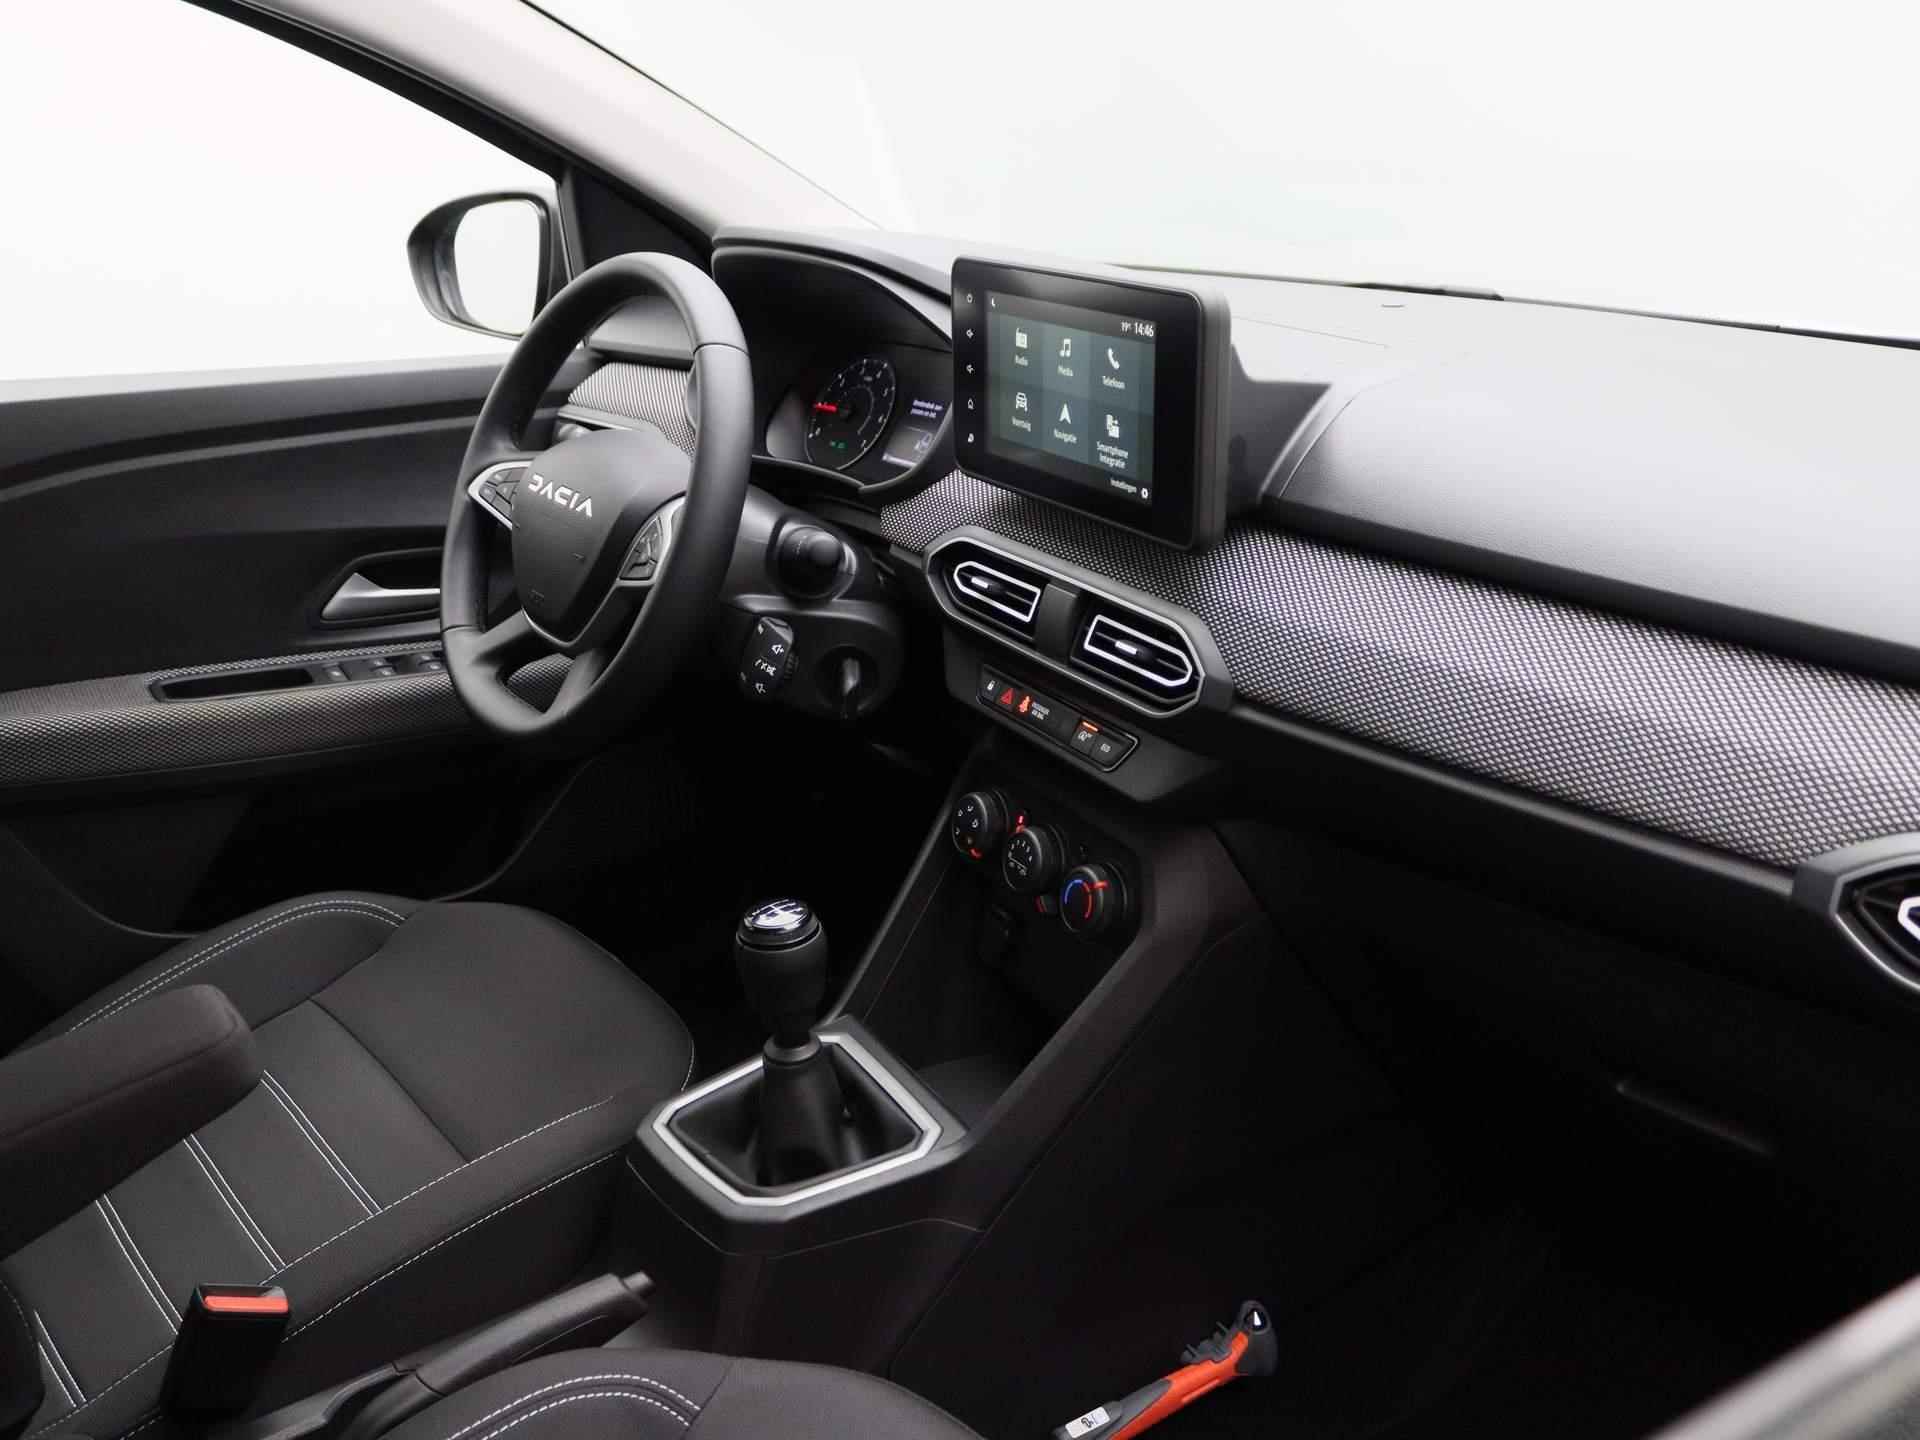 Dacia Sandero 1.0 TCe 90 Expression | Pack MediaNav | PDC Achter | LED-verlichting | Licht- en regensensor | Airconditioning | Apple Carplay & Android Auto - 29/34